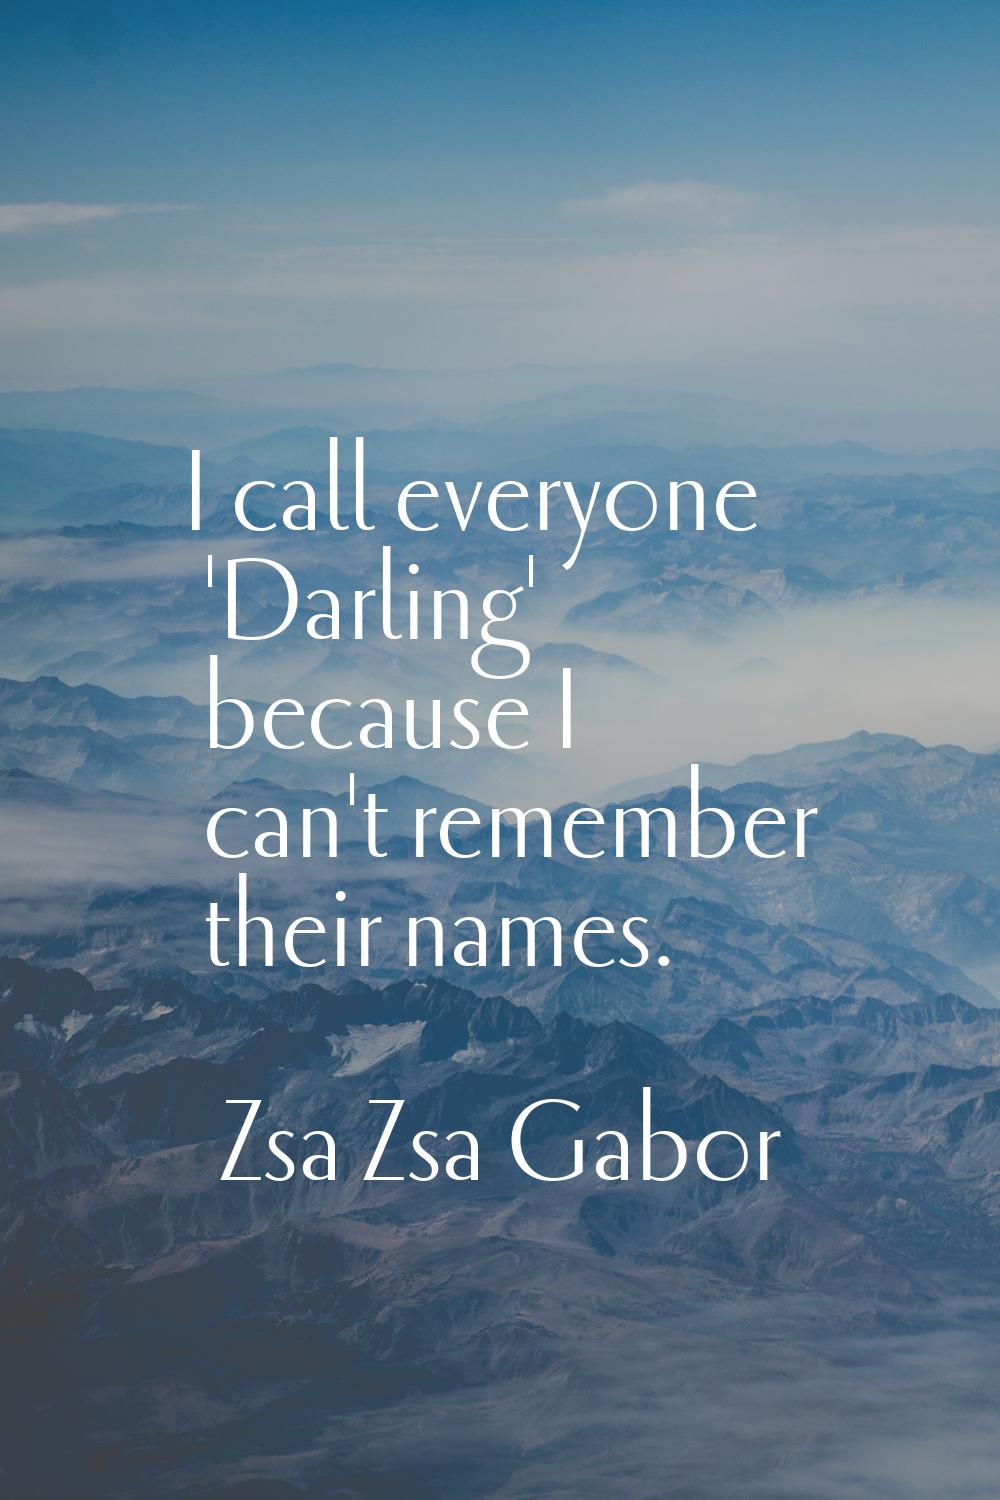 I call everyone 'Darling' because I can't remember their names.